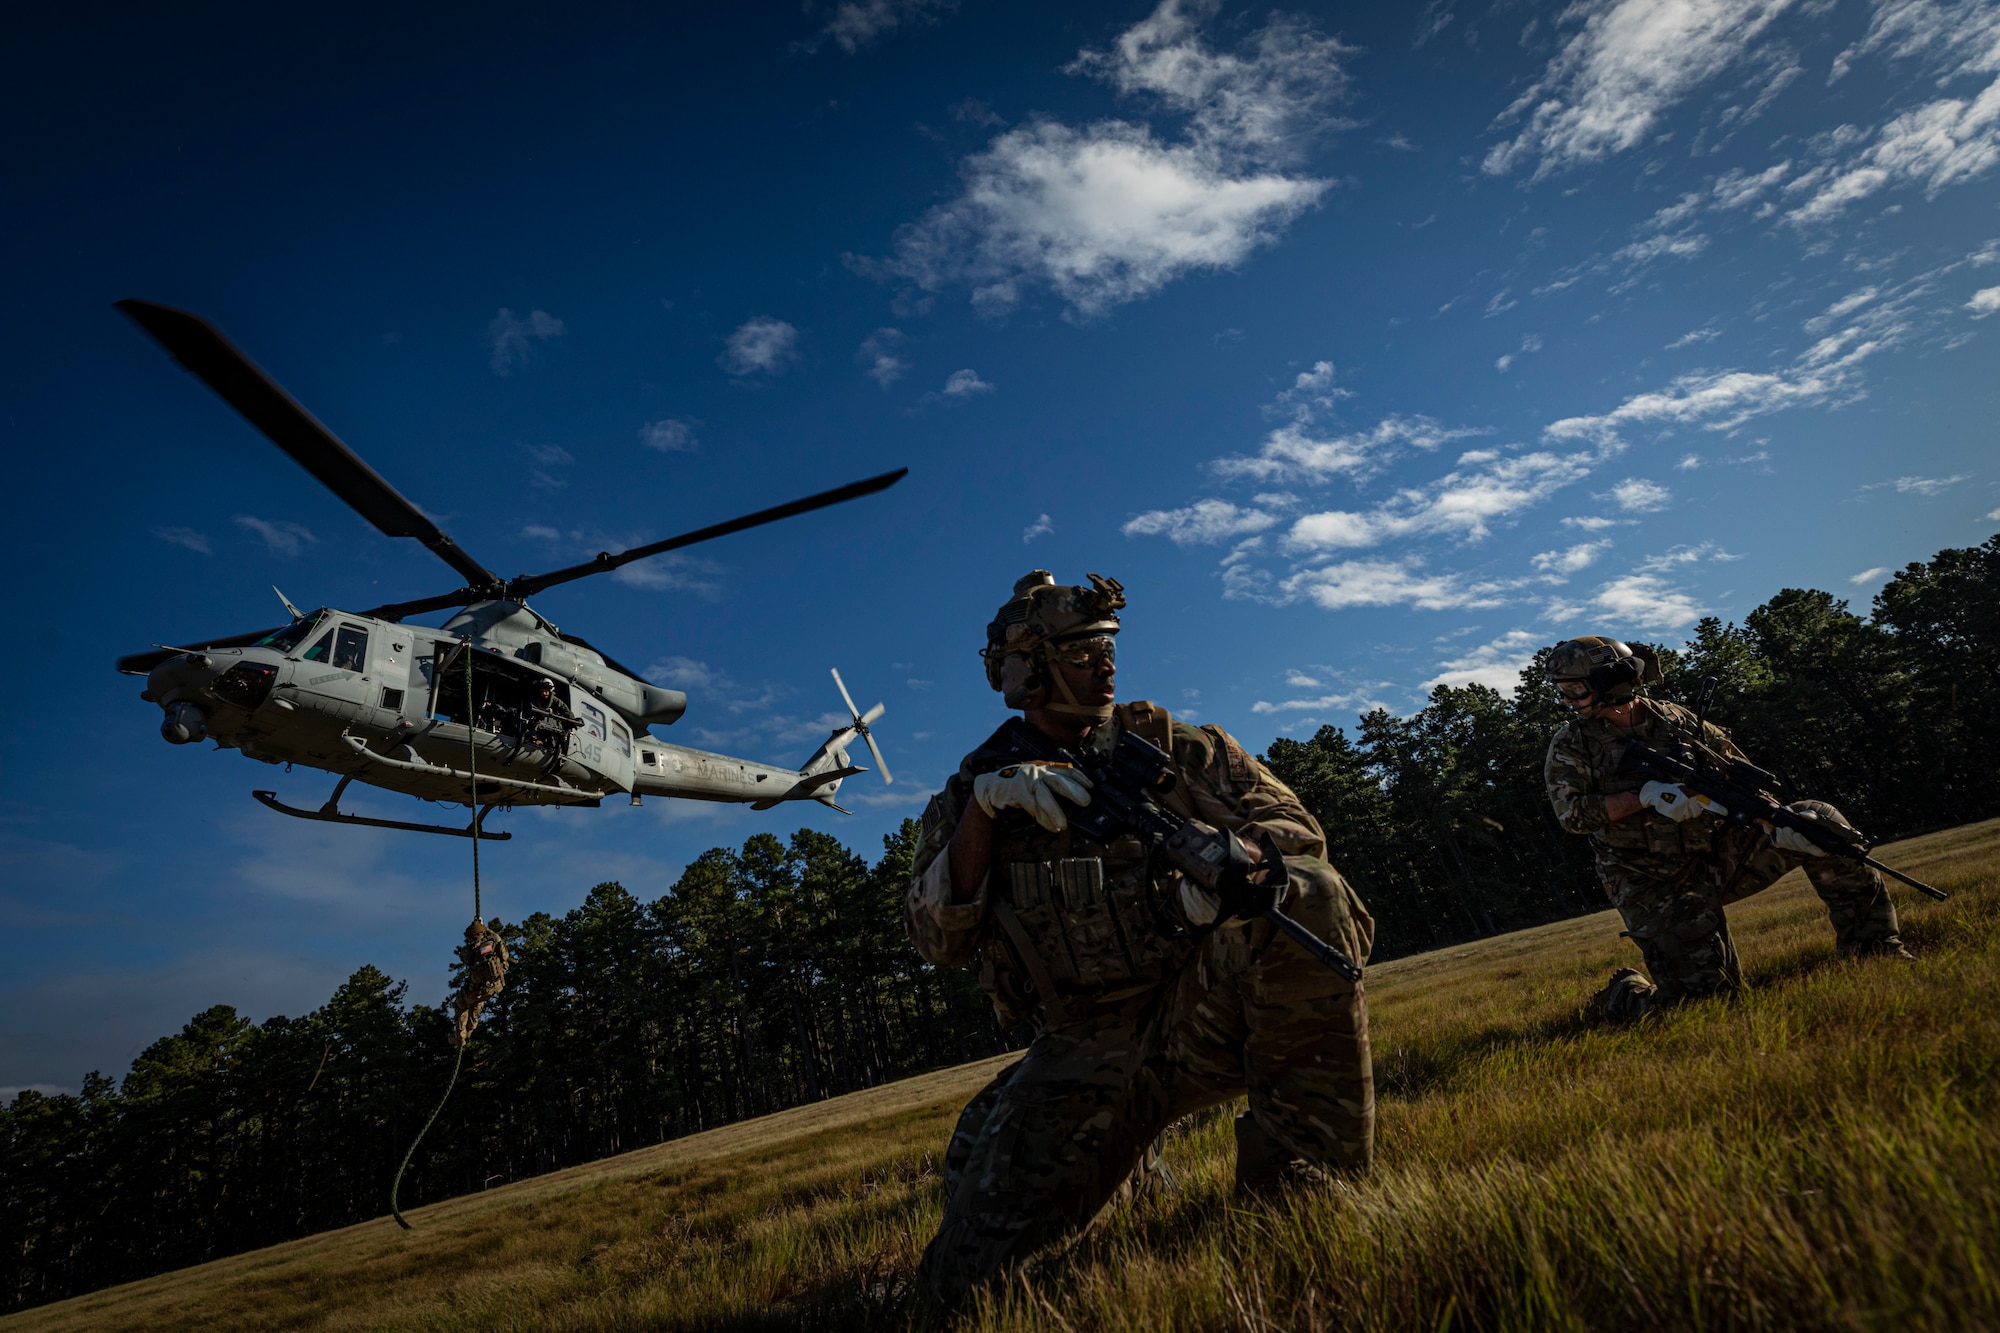 Airmen look out after fast roping to ground from helicopter